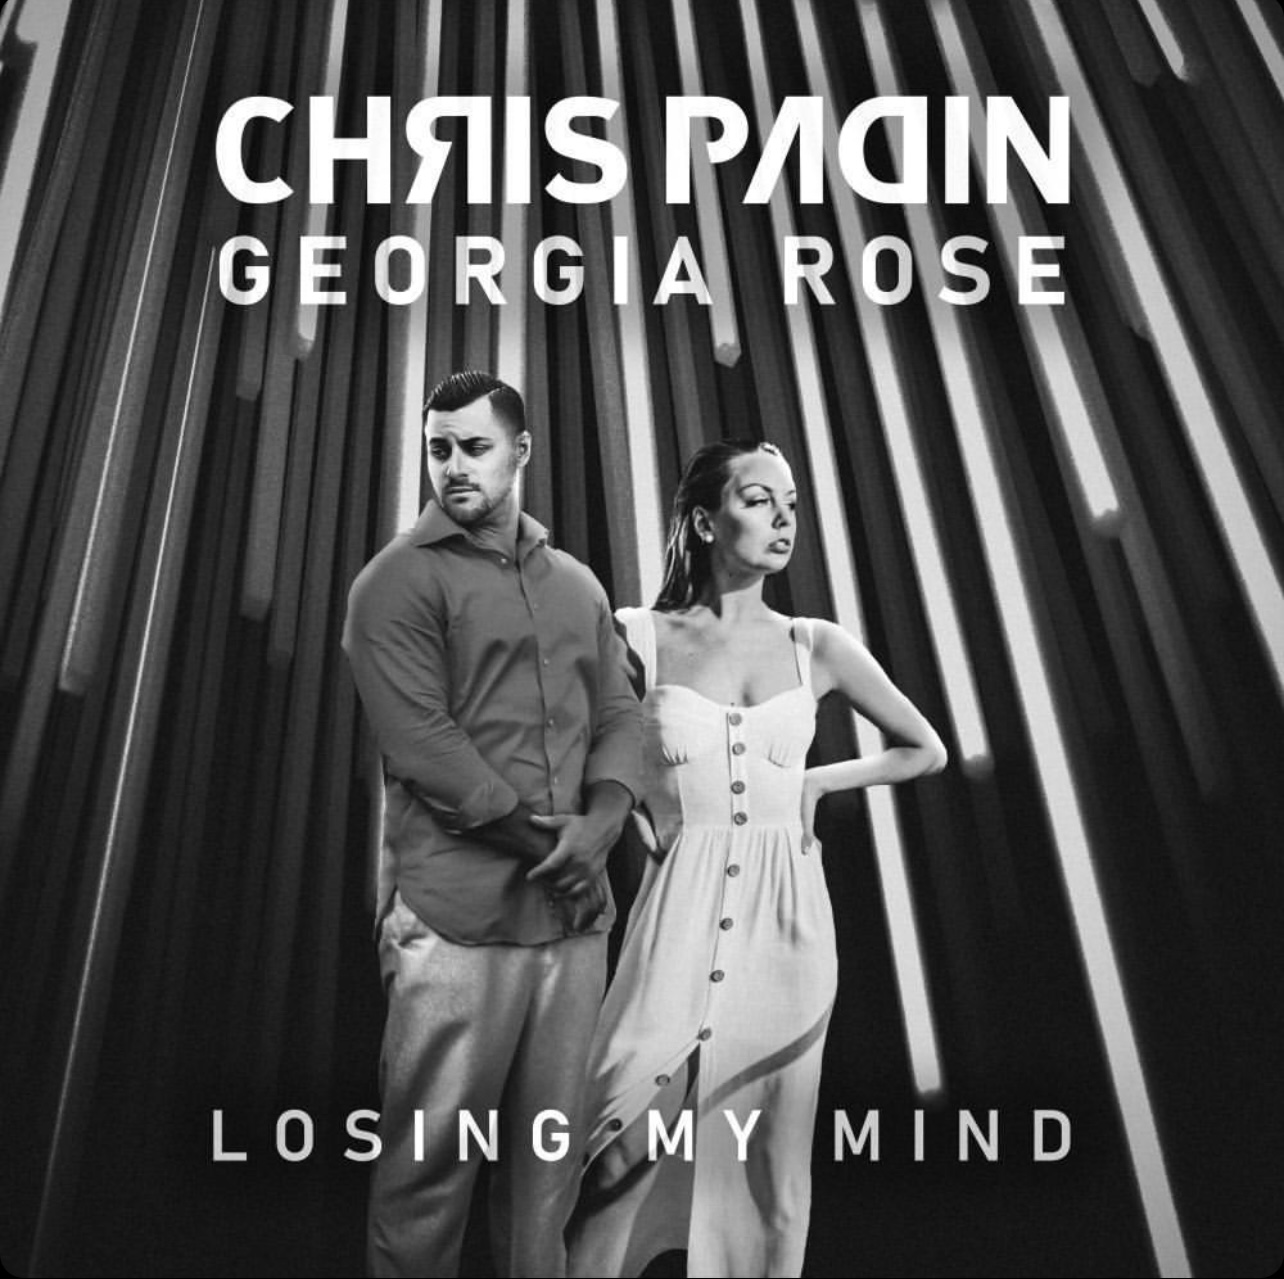 American DJ and EDM music producer ‘Chris Padin’ and ‘Georgia Rose’ connect via Instagram to partner up on the exceptional deep house song ‘Losing My mind’